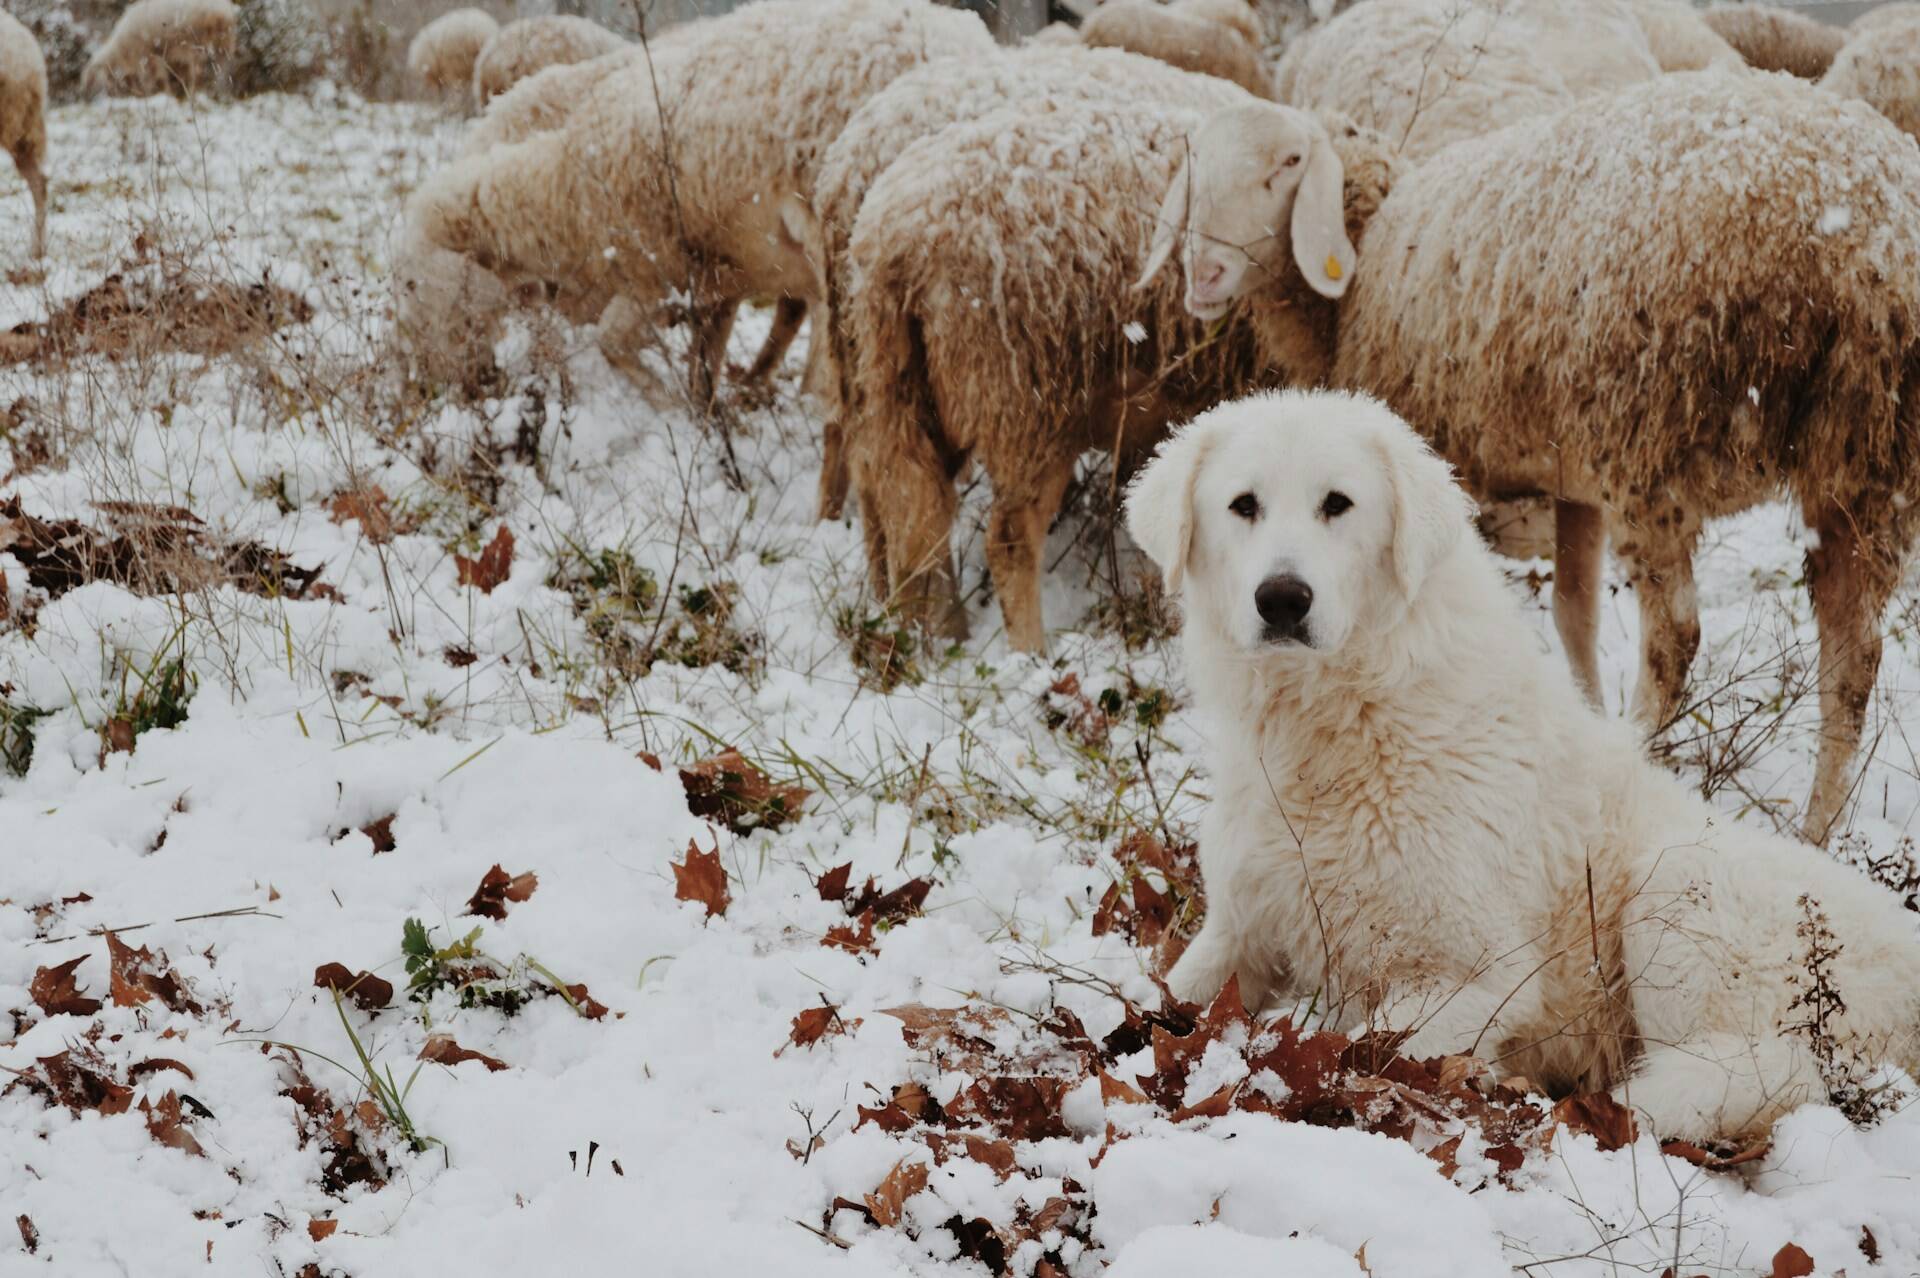 A white dog herding sheep in a snow